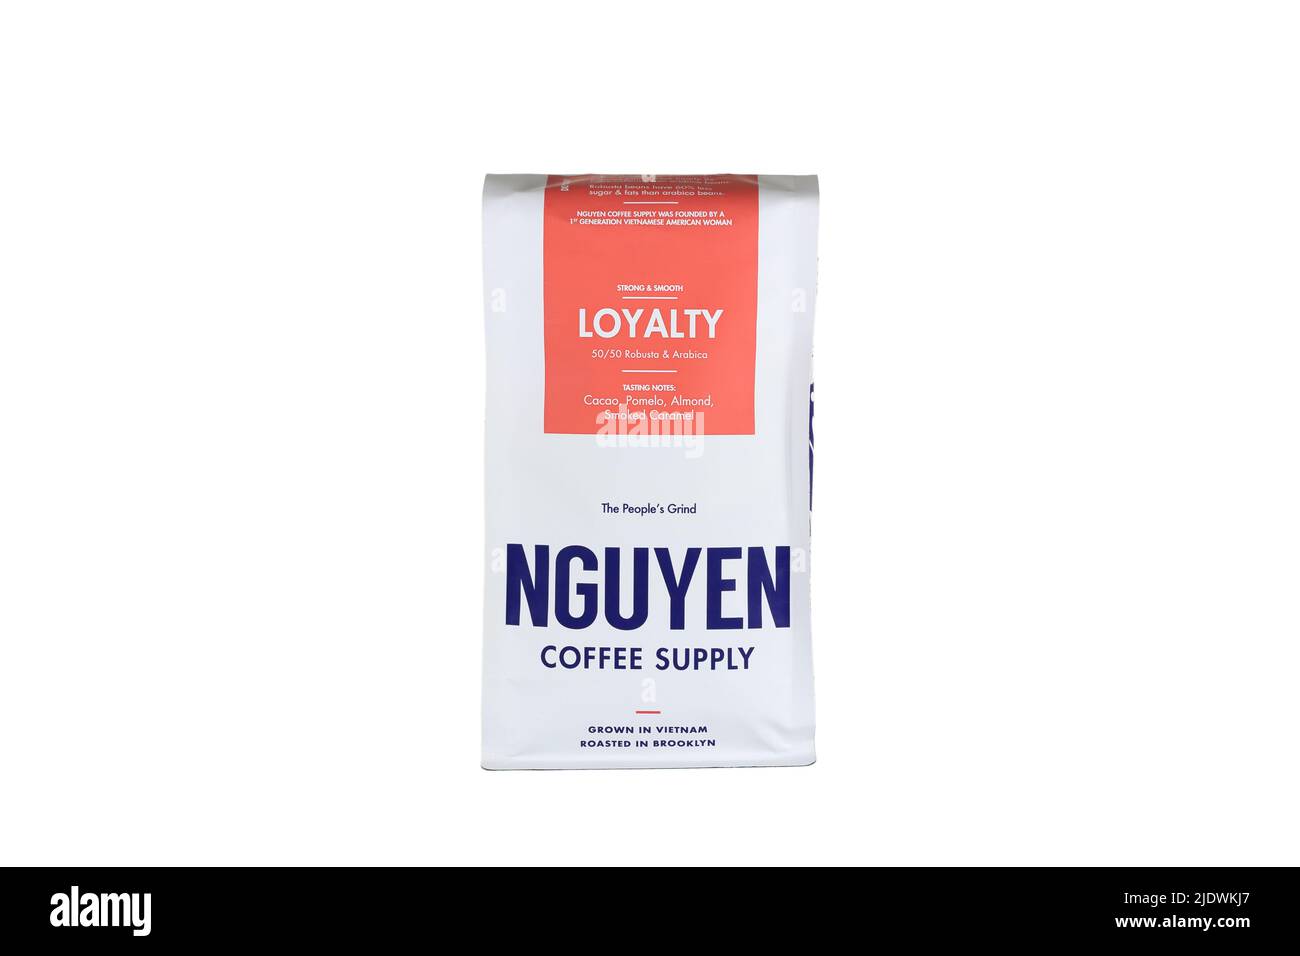 A bag of Nguyen Coffee Supply 'Loyalty' Vietnamese coffee isolated on a white background. cutout image for illustration and editorial use. Stock Photo